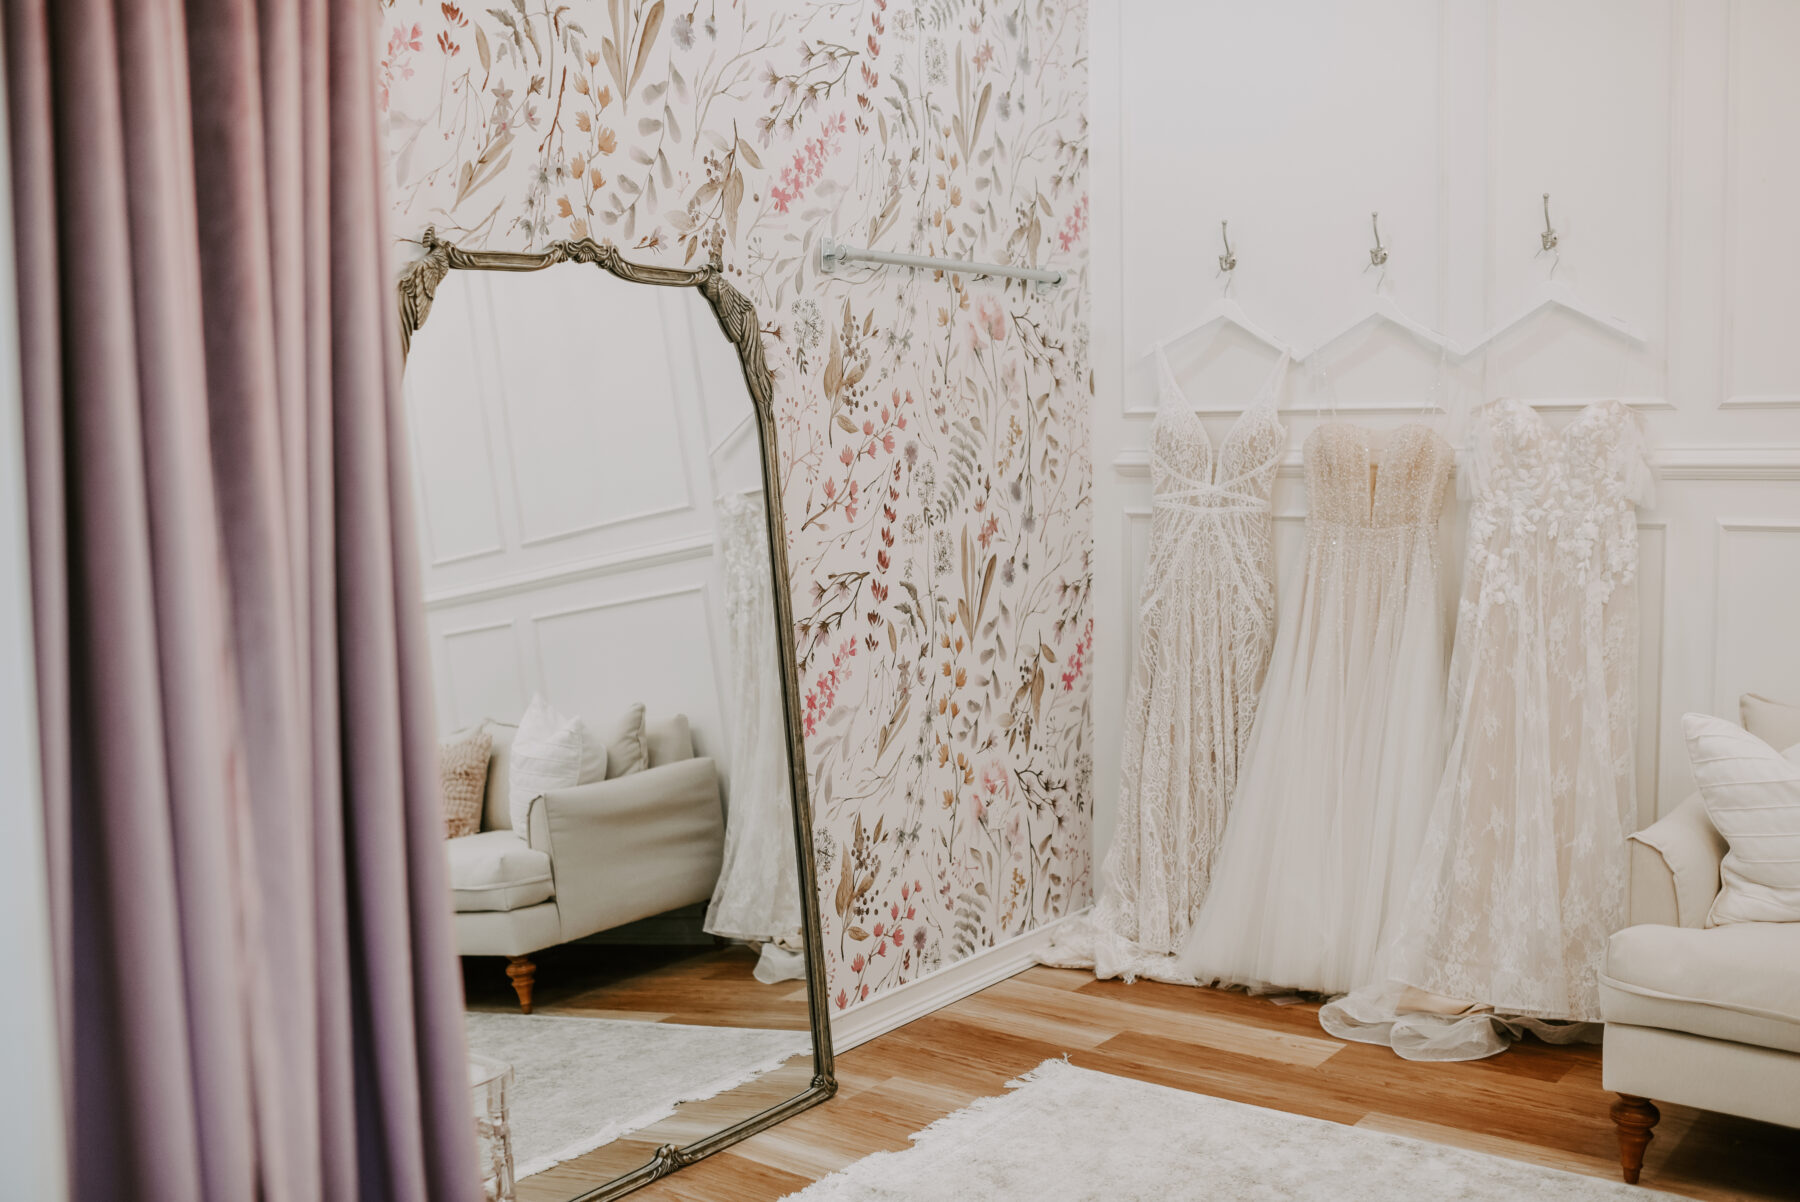 Reasons Why You Should Buy Your Wedding Dress from a Small Business Lavender Park Bridal